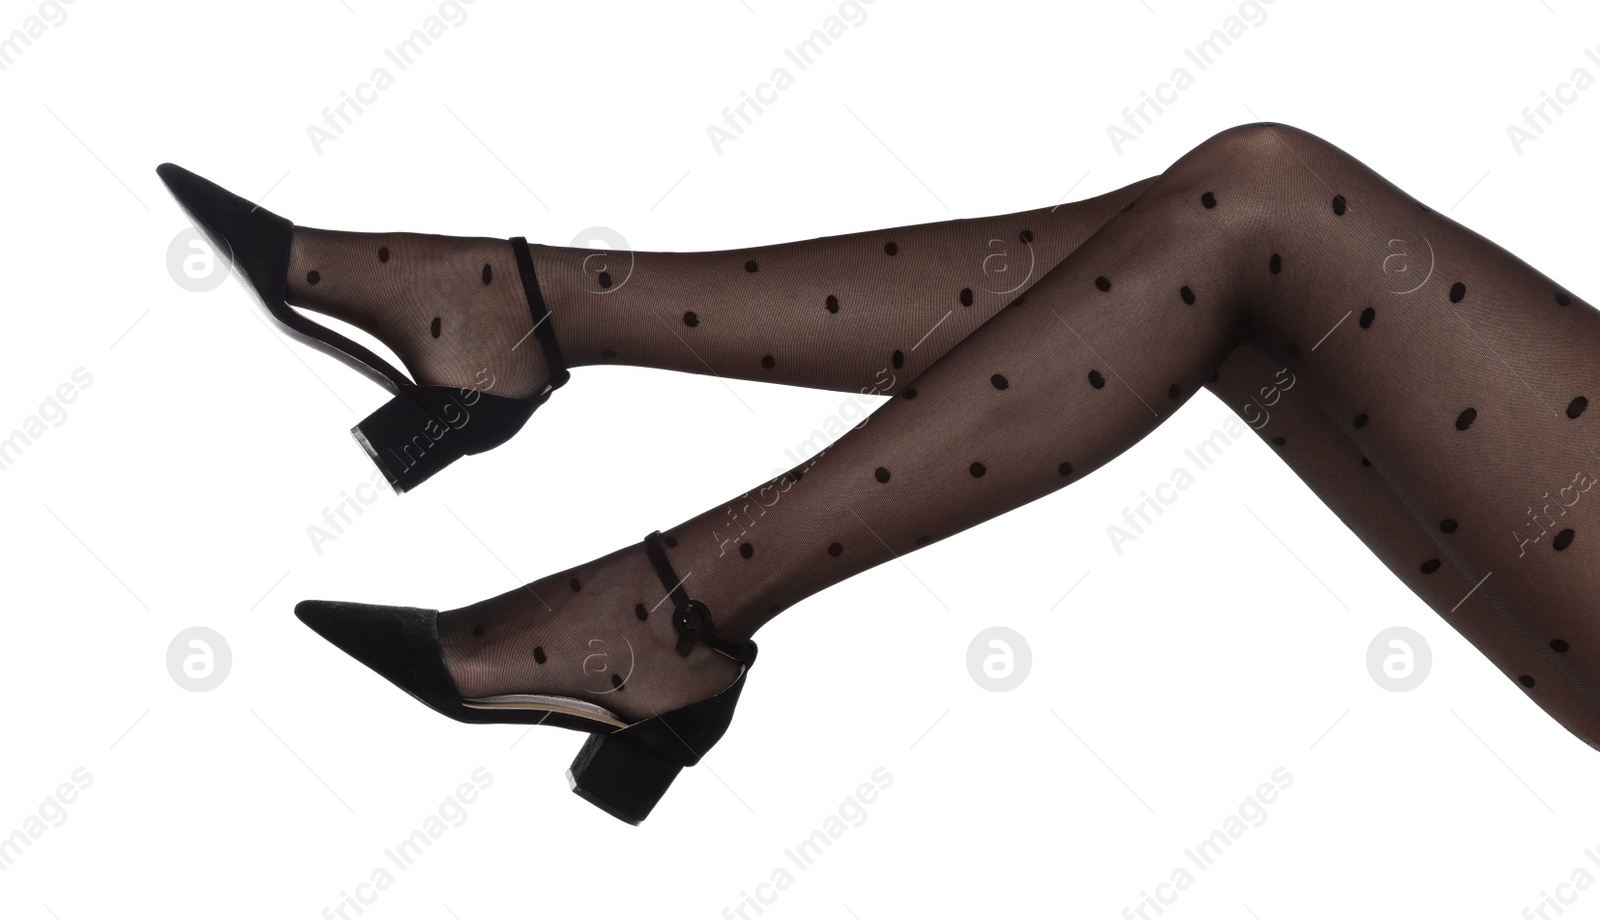 Photo of Woman wearing tights and stylish shoes on white background, closeup